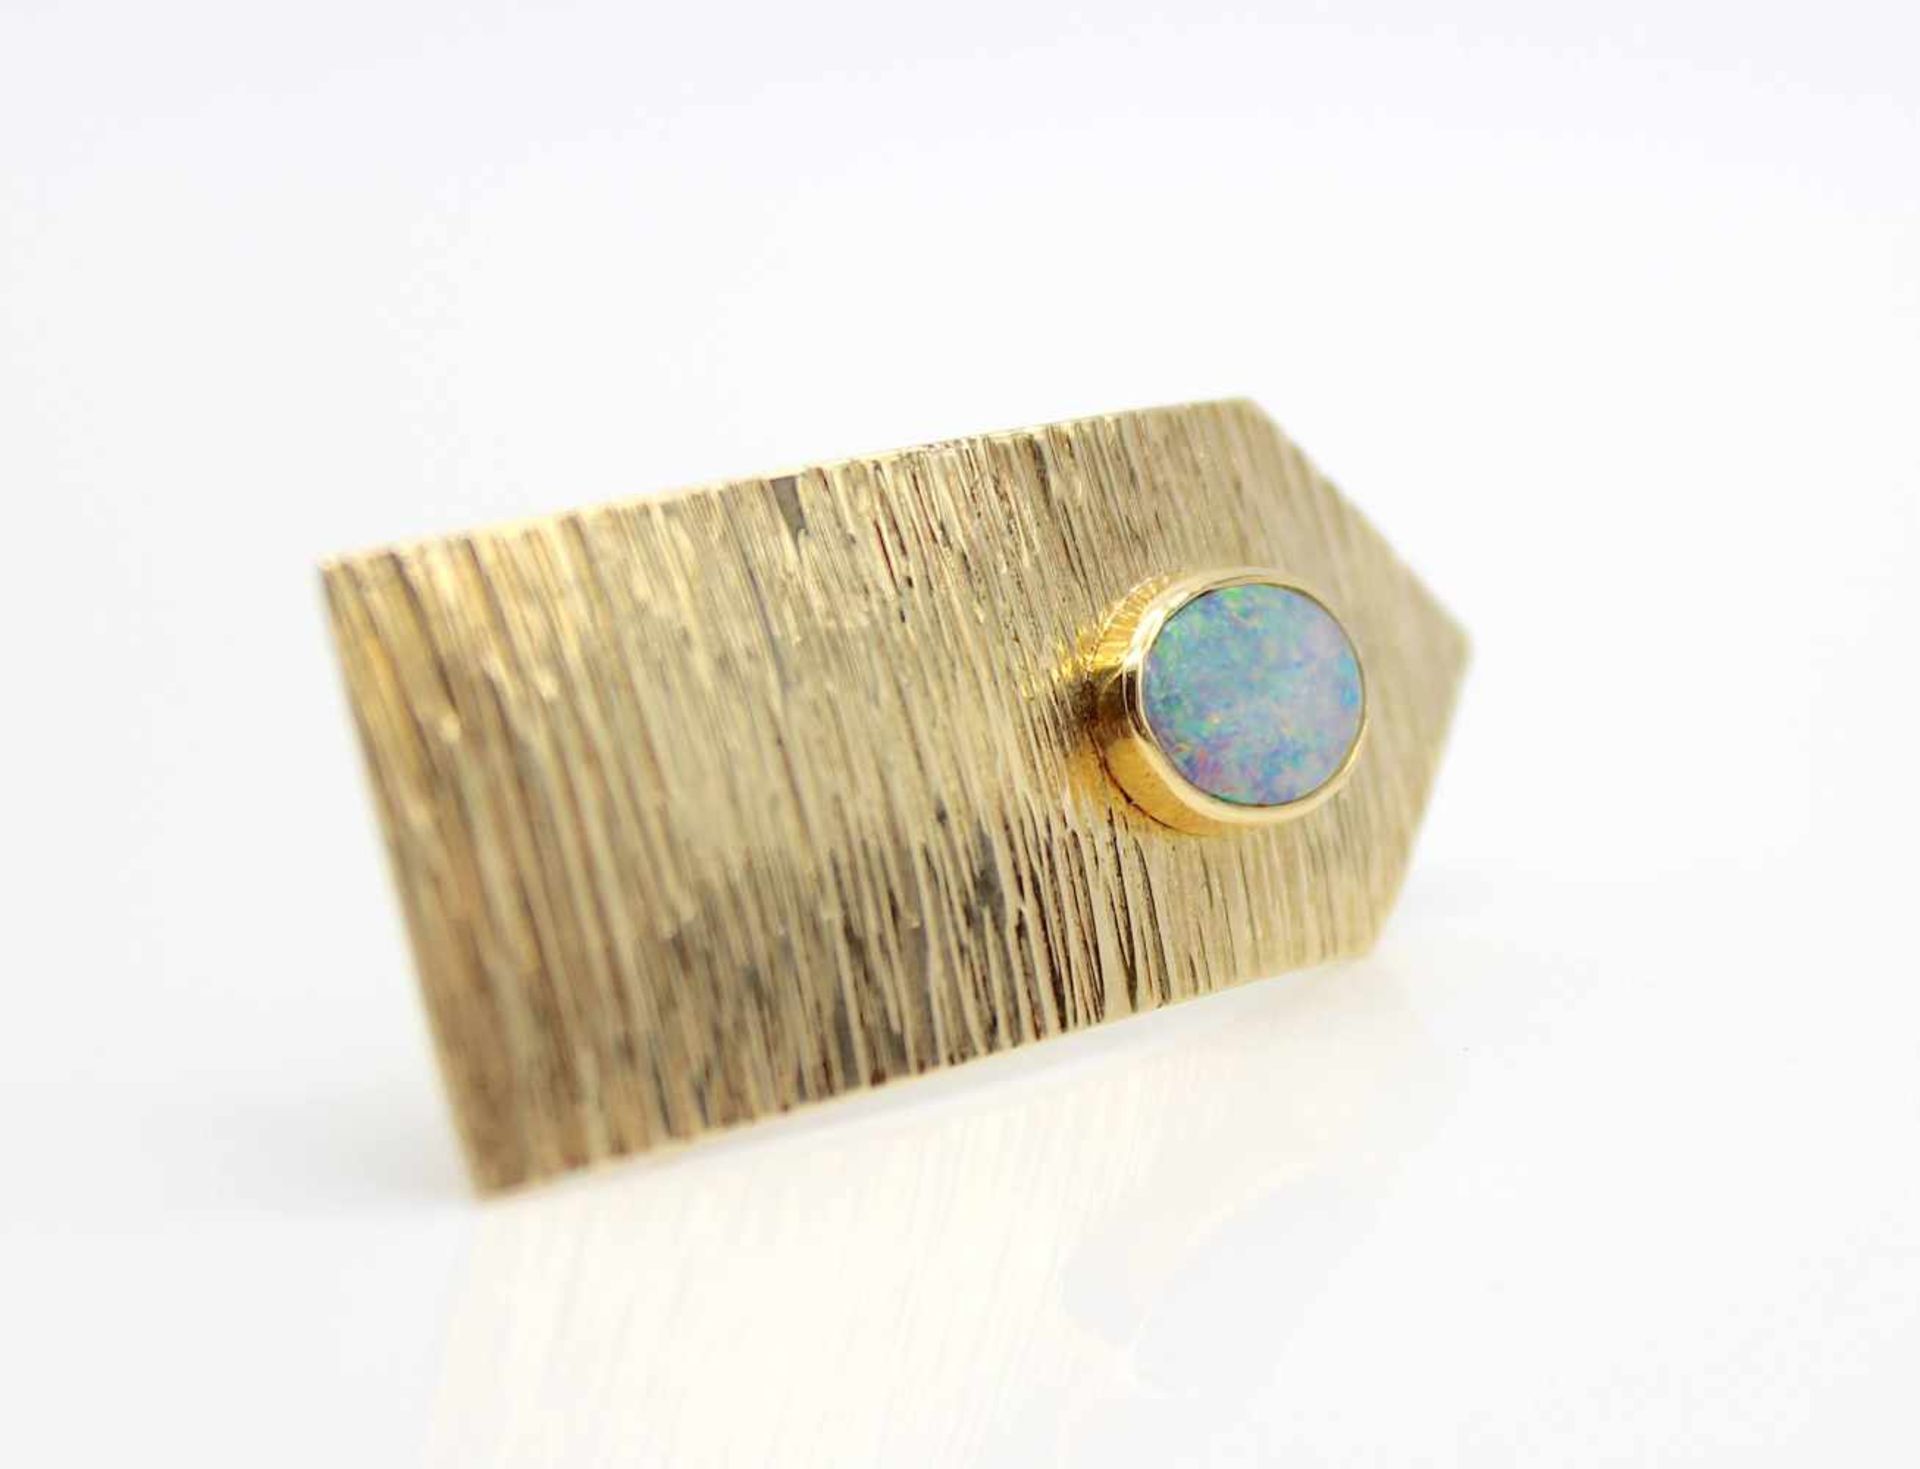 Hairgrip made of 585 gold with a precious opal. Weight 10,4 g, dimensions 54,8 x 20,6 mmHaarklemme - Bild 3 aus 4